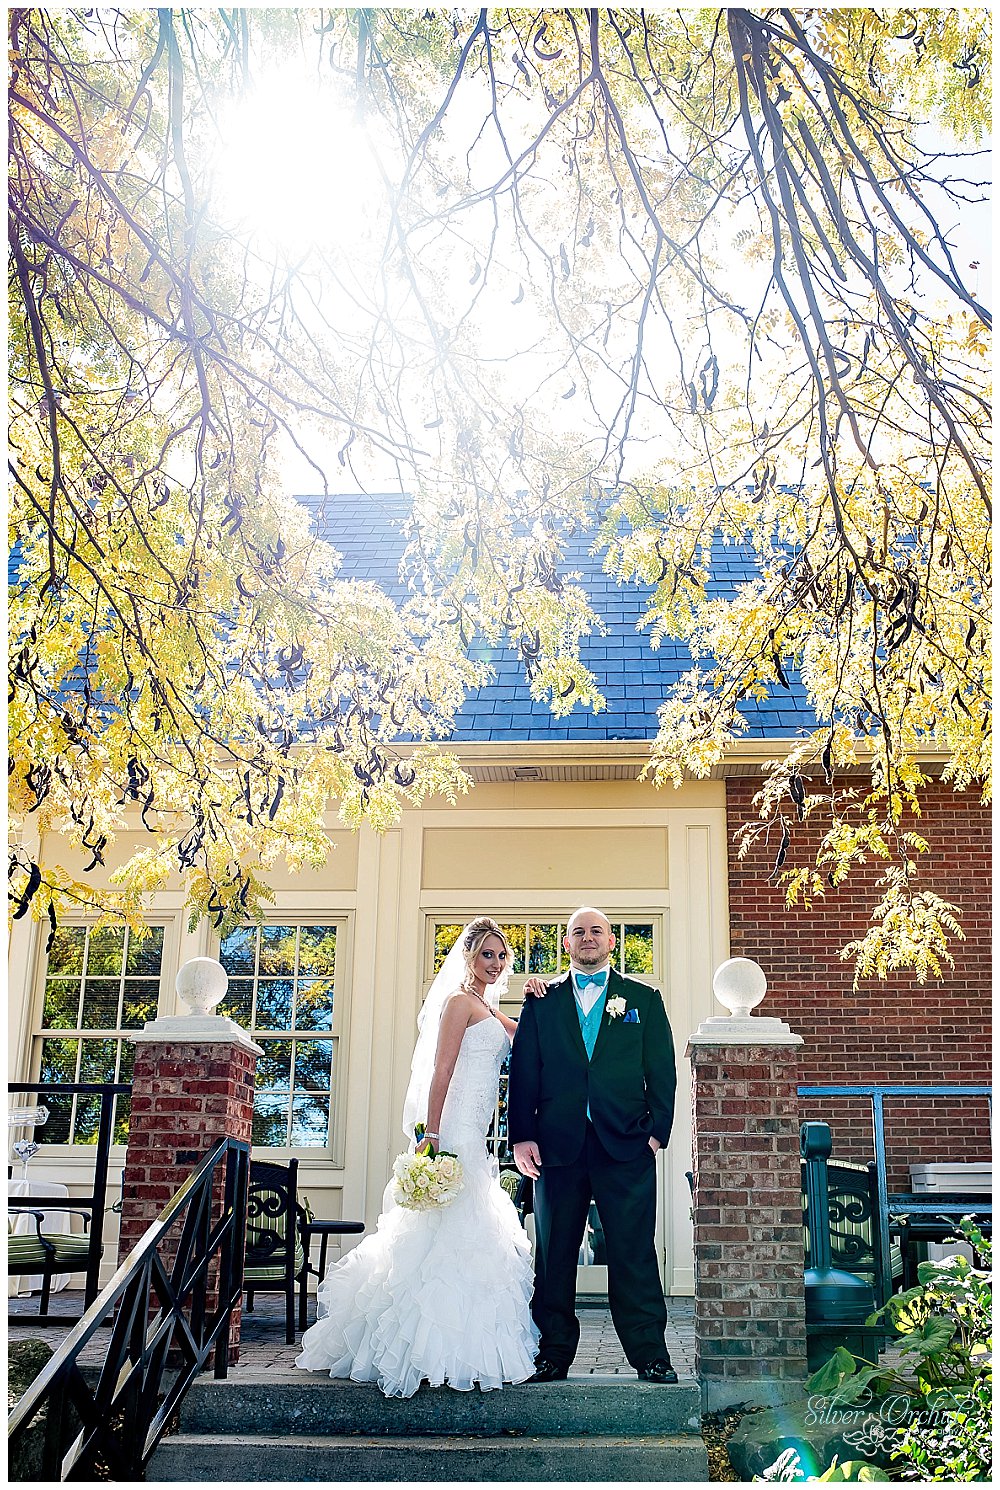 ©Silver Orchid Photography_wedding photography_CantandoBrooksideMacungie_silverorchidphotography.com_0084.jpg